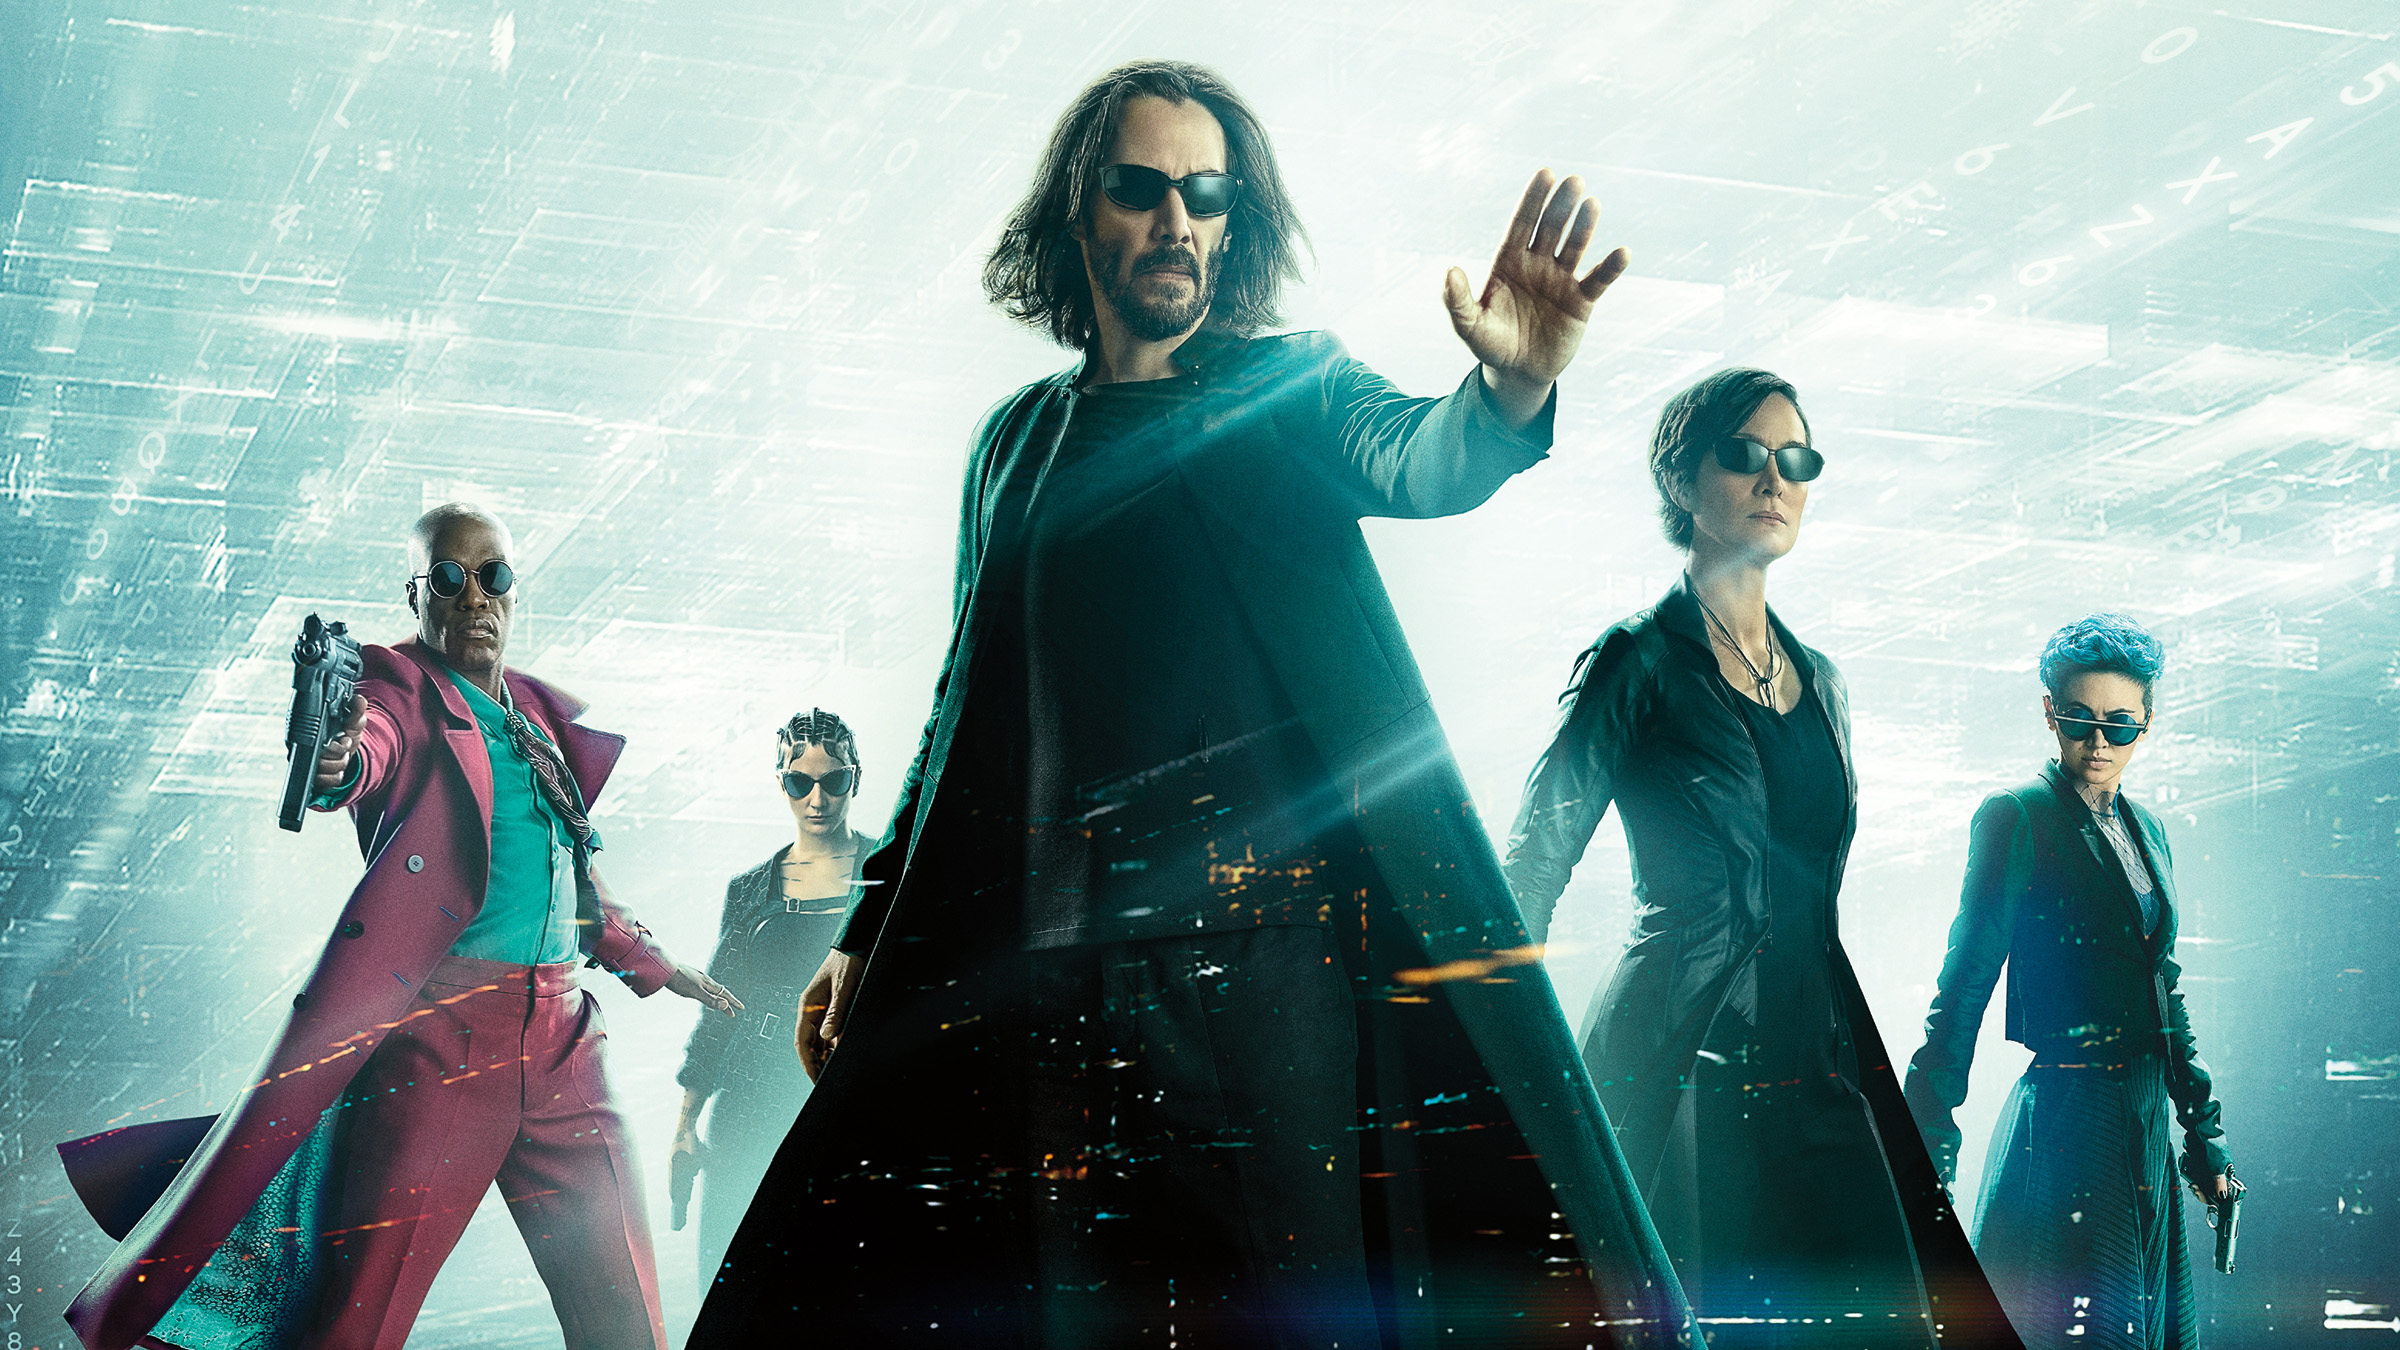 Art of the Cut: Behind the Scenes of “The Matrix Resurrections”